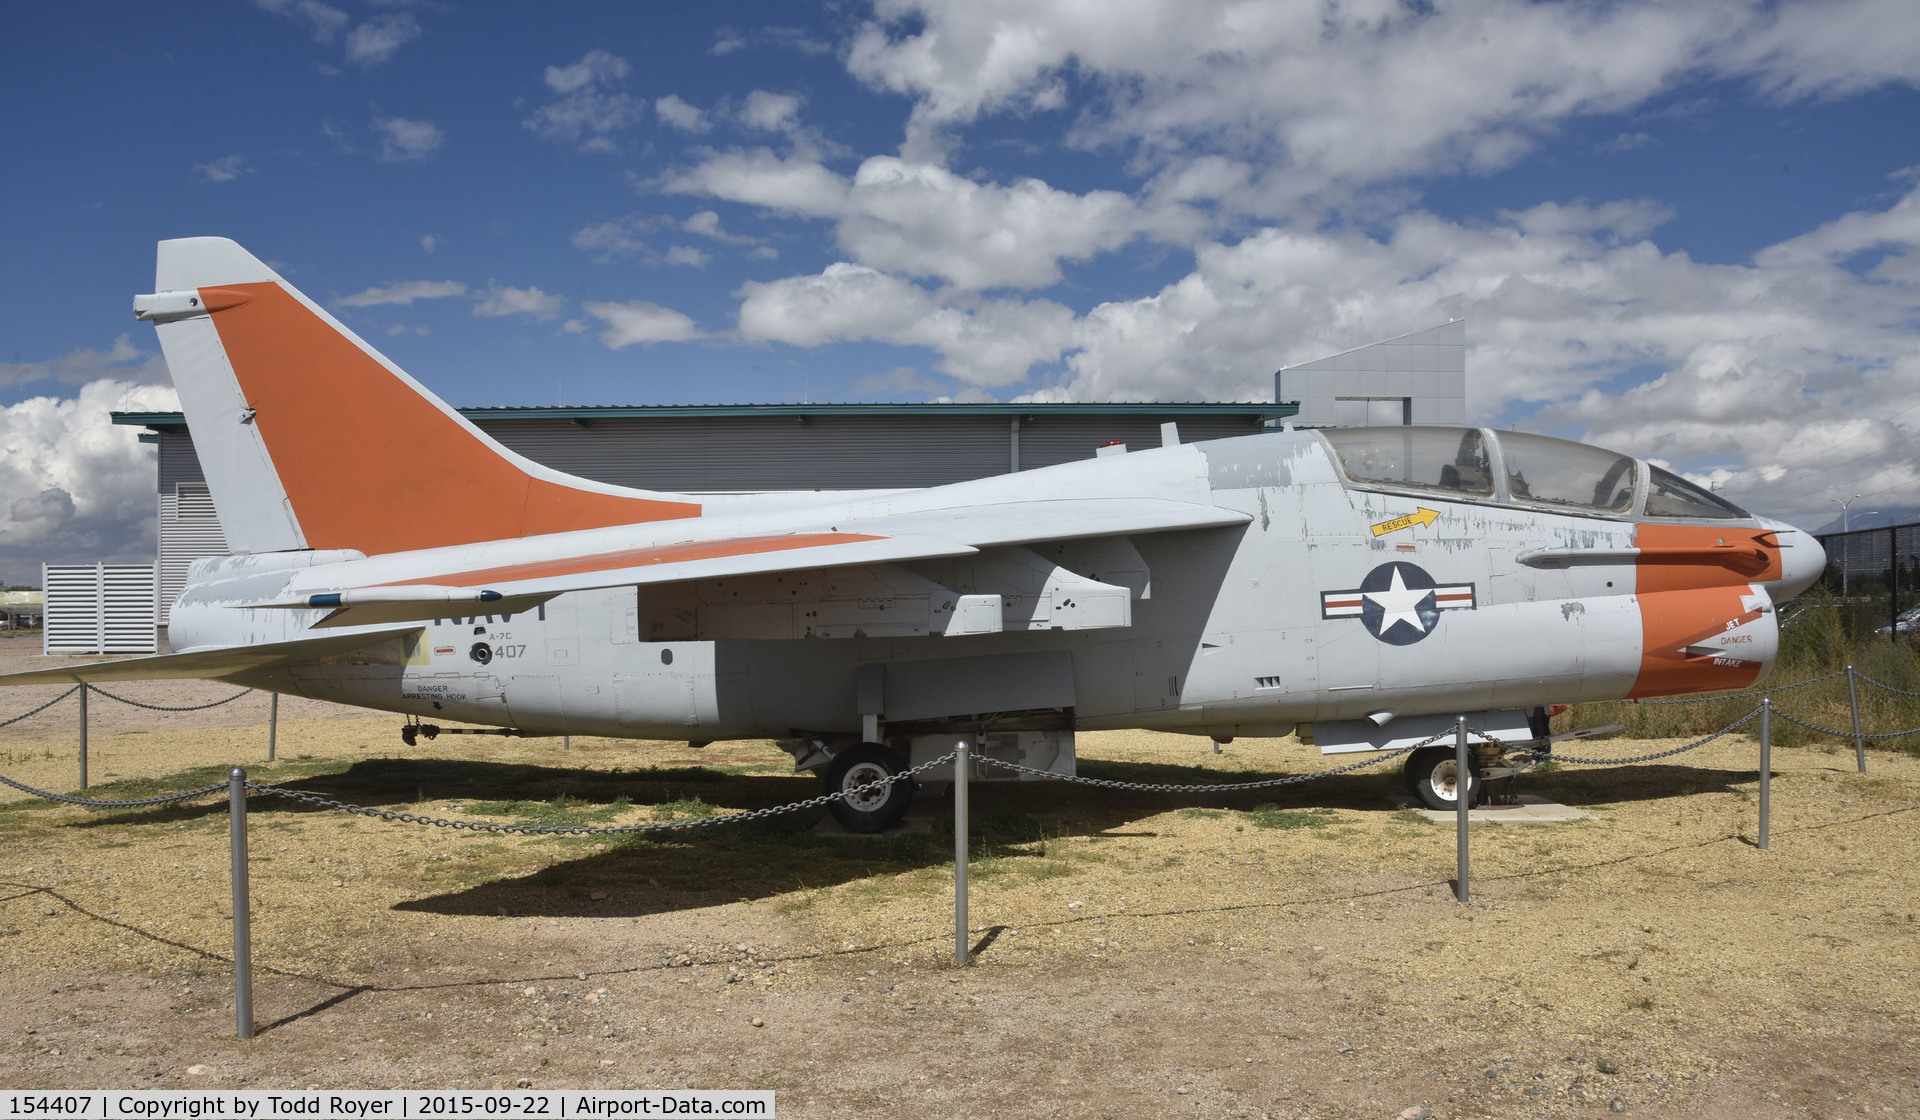 154407, LTV TA-7C Corsair II C/N B-047, On display at the National Museum of Nuclear Science and History